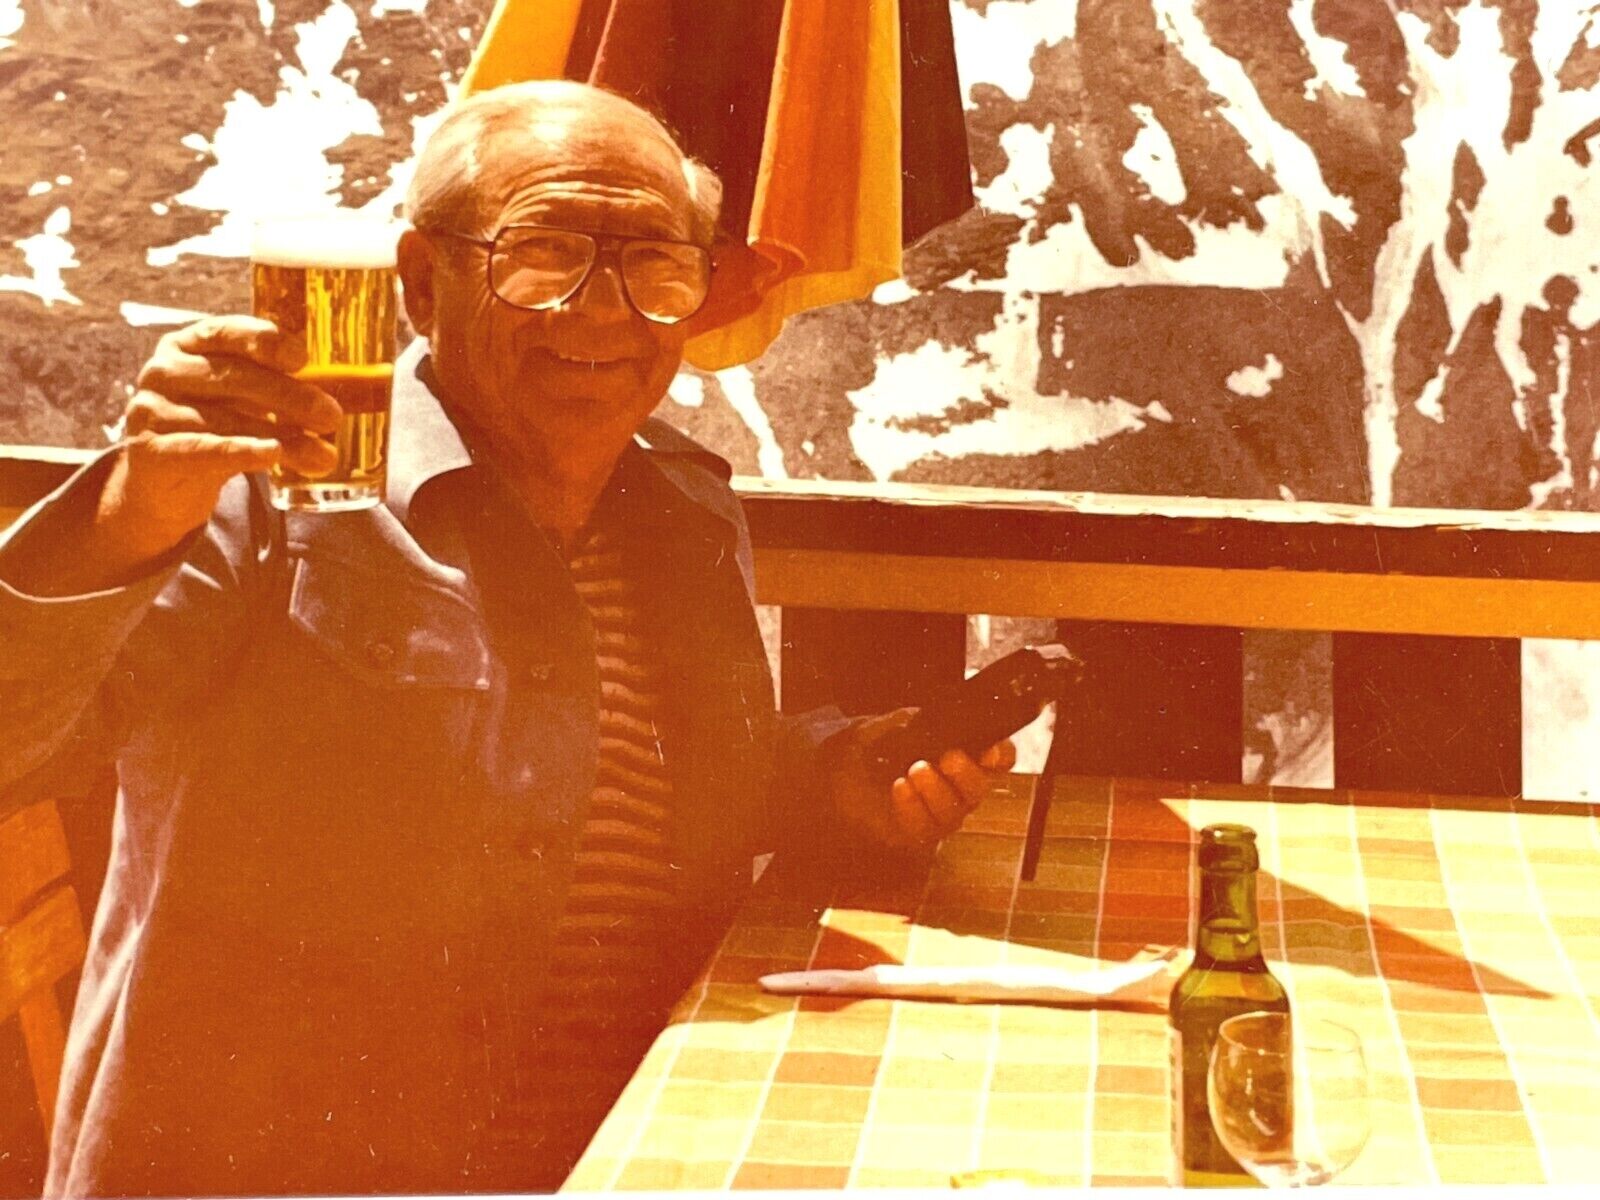 G7 Photograph Old Man In The Alps Artistic Raising Glass Beer Cheers Cute